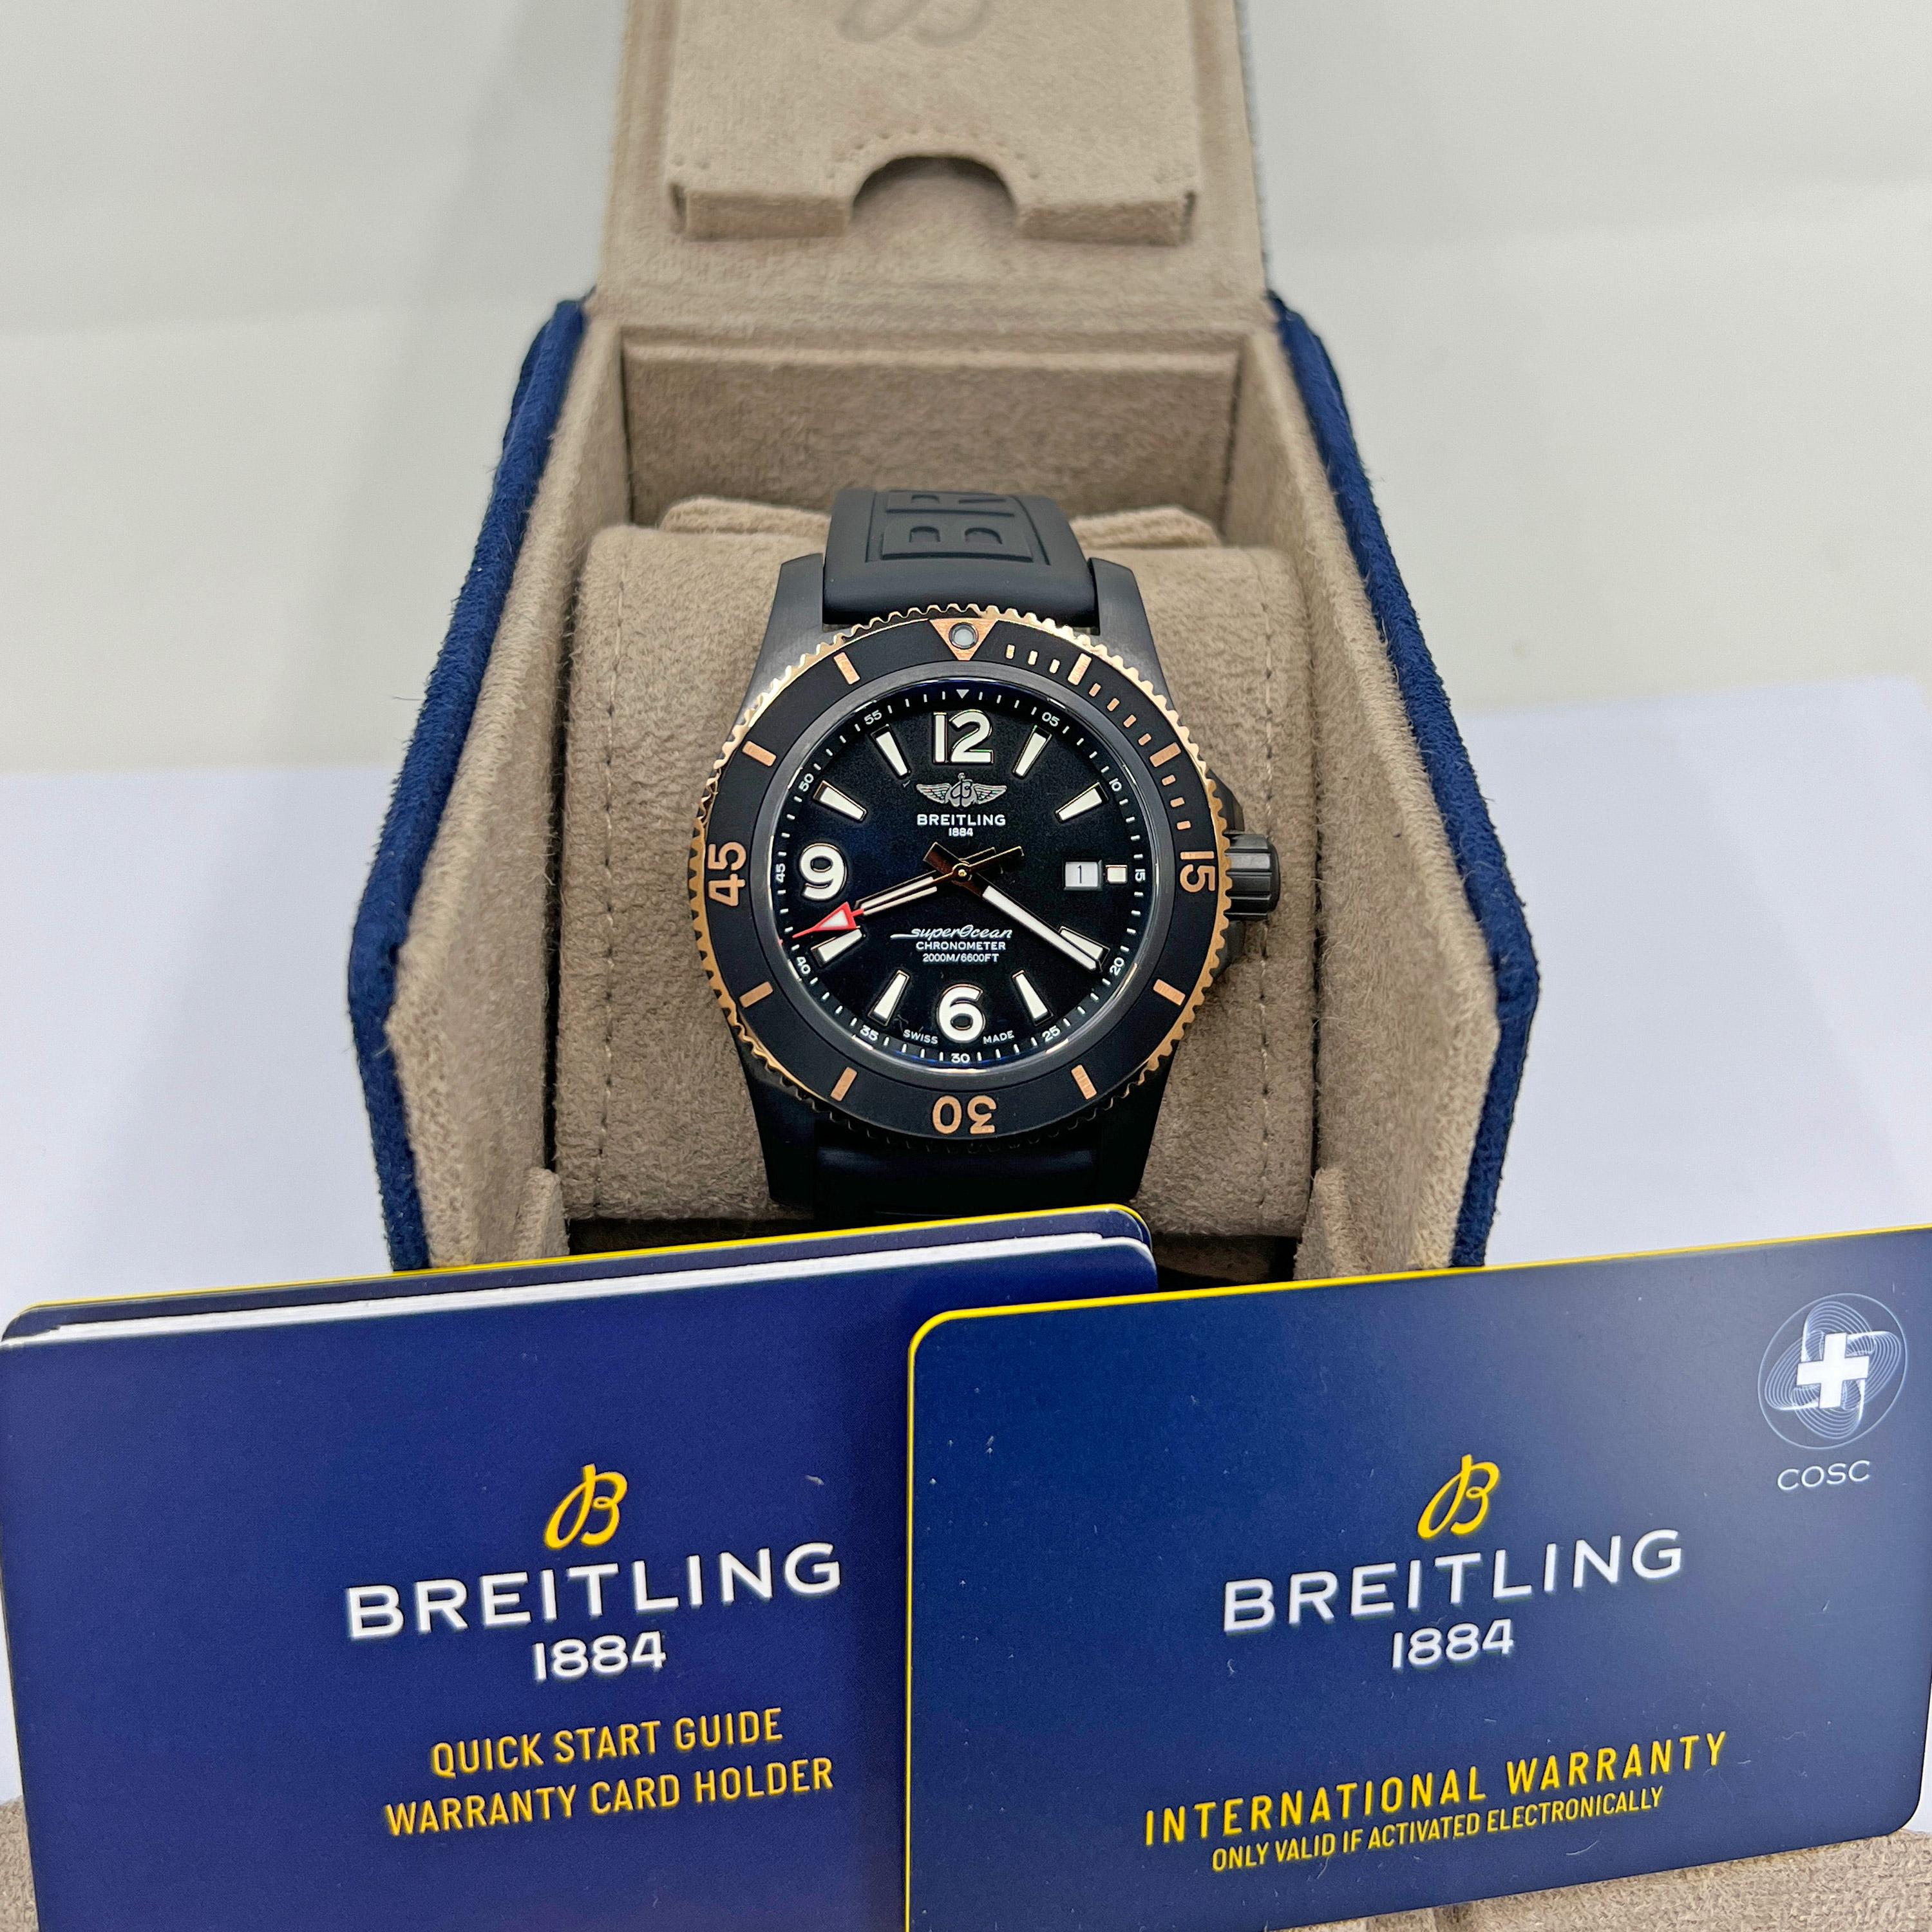 46 mm Stainless Steel case. Unidirectional, ratcheted bezel. Cambered sapphire, glareproofed both sides crystal. Breitling 17 caliber, self-winding mechanical movement, 38 hours power reserve, 25 jewels. Stainless Steel strap. Water resistance 2,000